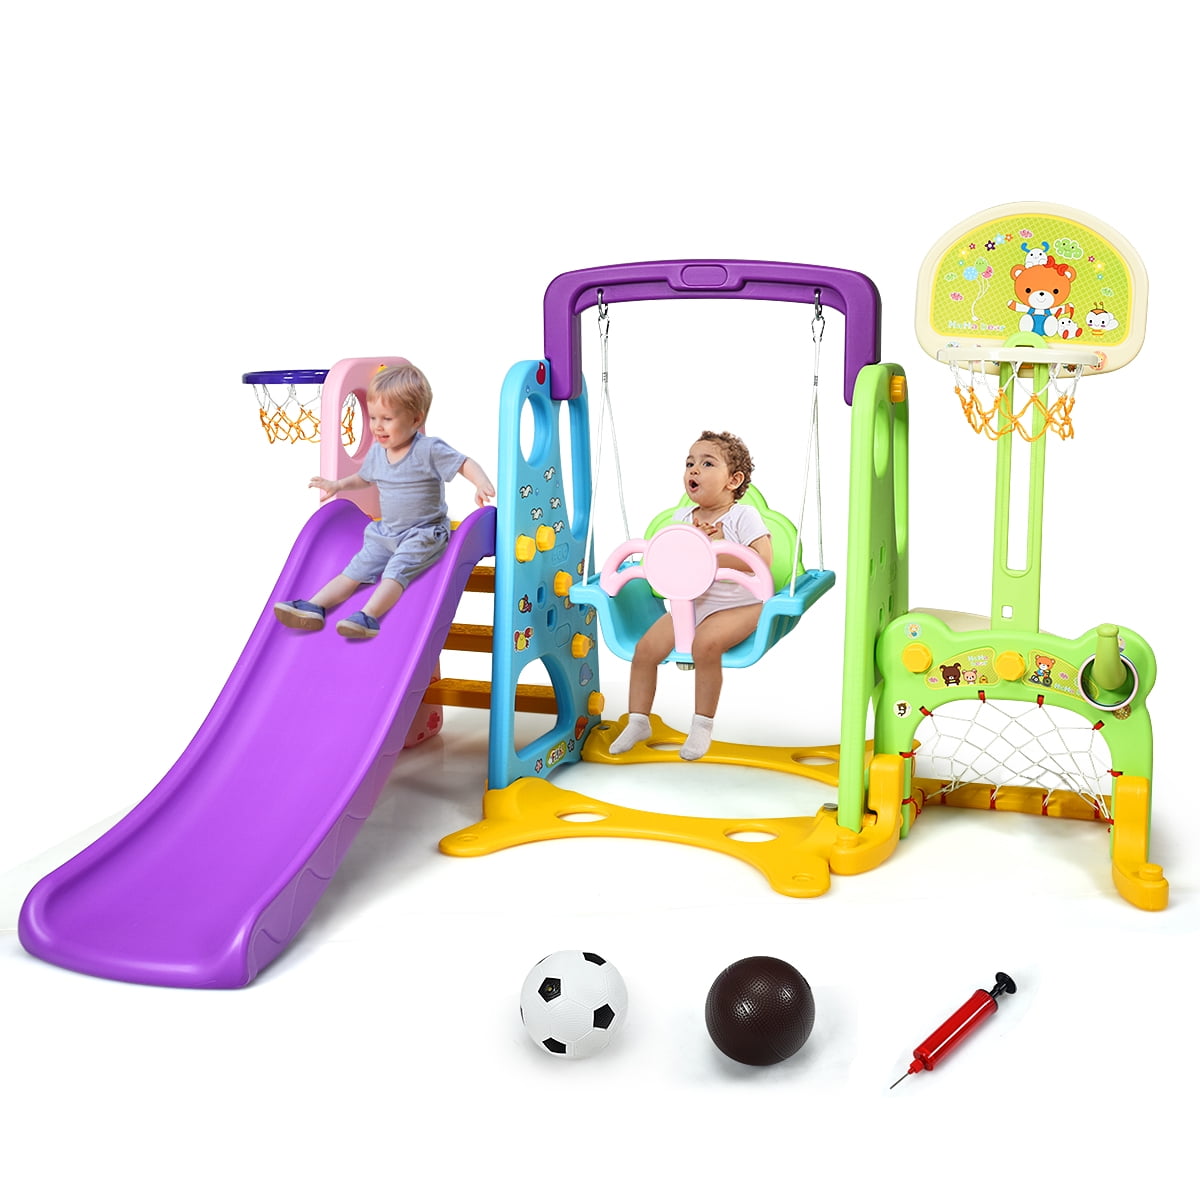 Kids Indoor and Outdoor Playground Combination Climber/ Slide/ Swing/ Basketball/ Football/ Baseball w/ Music 3-in-1 Slide Blue for Boys & Girls A-free 6-in-1 Toddler Slide and Swing Set 